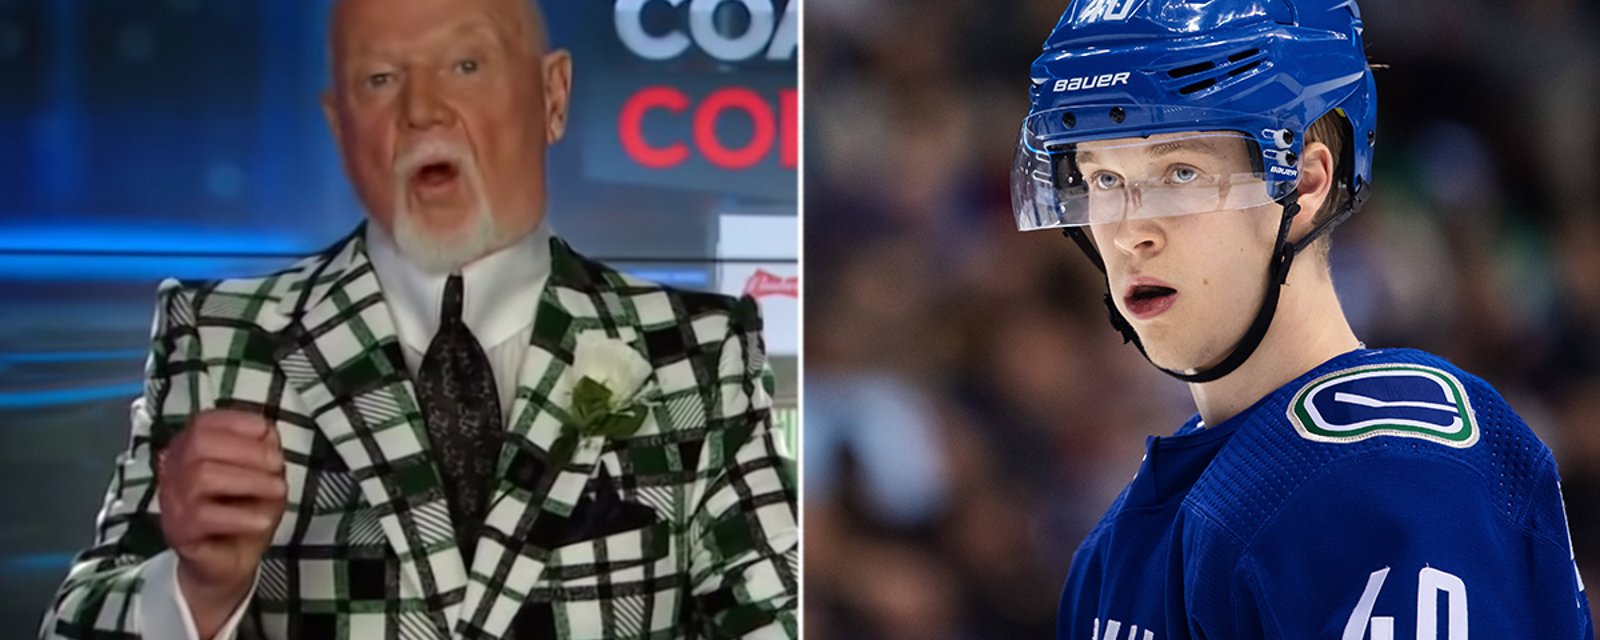 Don Cherry tears a strip off Canucks rookie Pettersson, pumps up Leafs' Marner